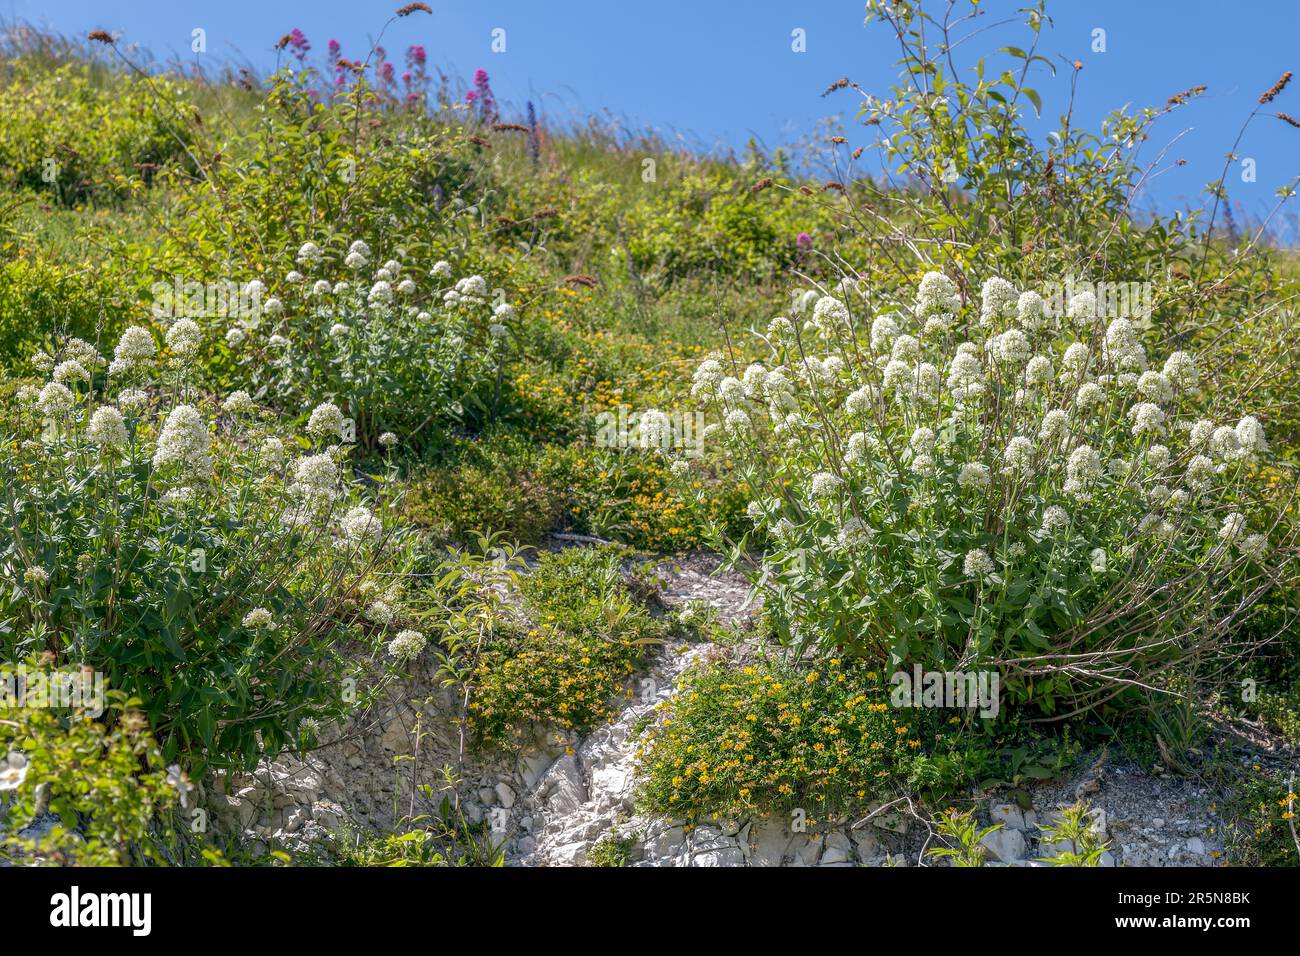 White Valerian (Centranthus ruber alba) growing on cliffs at Eastbourne Stock Photo